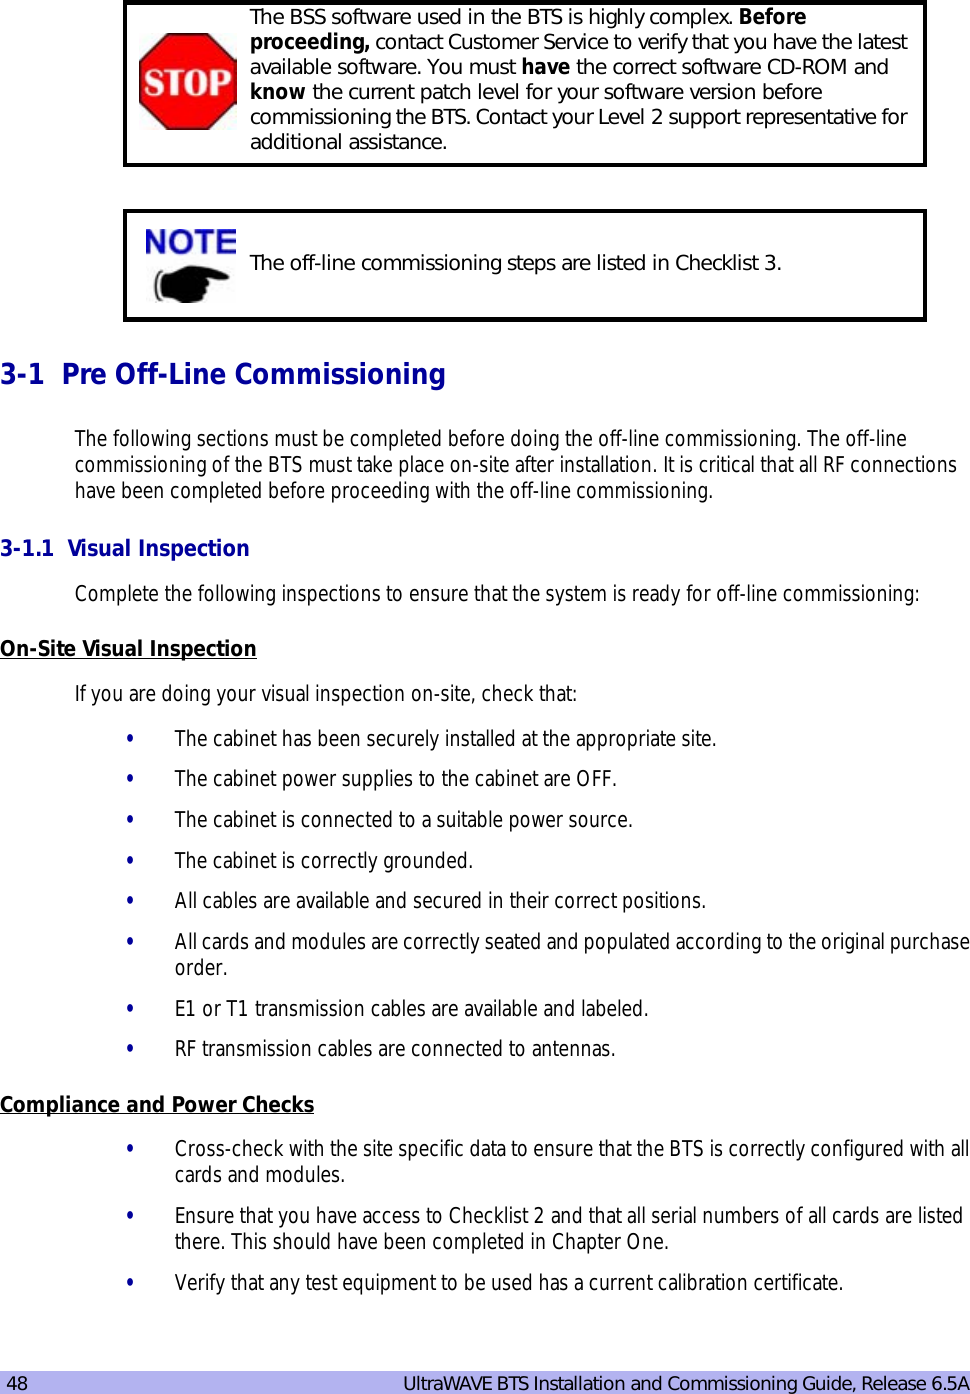 48   UltraWAVE BTS Installation and Commissioning Guide, Release 6.5A3-1  Pre Off-Line CommissioningThe following sections must be completed before doing the off-line commissioning. The off-line commissioning of the BTS must take place on-site after installation. It is critical that all RF connections have been completed before proceeding with the off-line commissioning.3-1.1  Visual InspectionComplete the following inspections to ensure that the system is ready for off-line commissioning:On-Site Visual InspectionIf you are doing your visual inspection on-site, check that:•The cabinet has been securely installed at the appropriate site.•The cabinet power supplies to the cabinet are OFF.•The cabinet is connected to a suitable power source.•The cabinet is correctly grounded.•All cables are available and secured in their correct positions.•All cards and modules are correctly seated and populated according to the original purchase order.•E1 or T1 transmission cables are available and labeled. •RF transmission cables are connected to antennas.Compliance and Power Checks•Cross-check with the site specific data to ensure that the BTS is correctly configured with all cards and modules.•Ensure that you have access to Checklist 2 and that all serial numbers of all cards are listed there. This should have been completed in Chapter One.•Verify that any test equipment to be used has a current calibration certificate.The BSS software used in the BTS is highly complex. Before proceeding, contact Customer Service to verify that you have the latest available software. You must have the correct software CD-ROM and know the current patch level for your software version before commissioning the BTS. Contact your Level 2 support representative for additional assistance.The off-line commissioning steps are listed in Checklist 3.